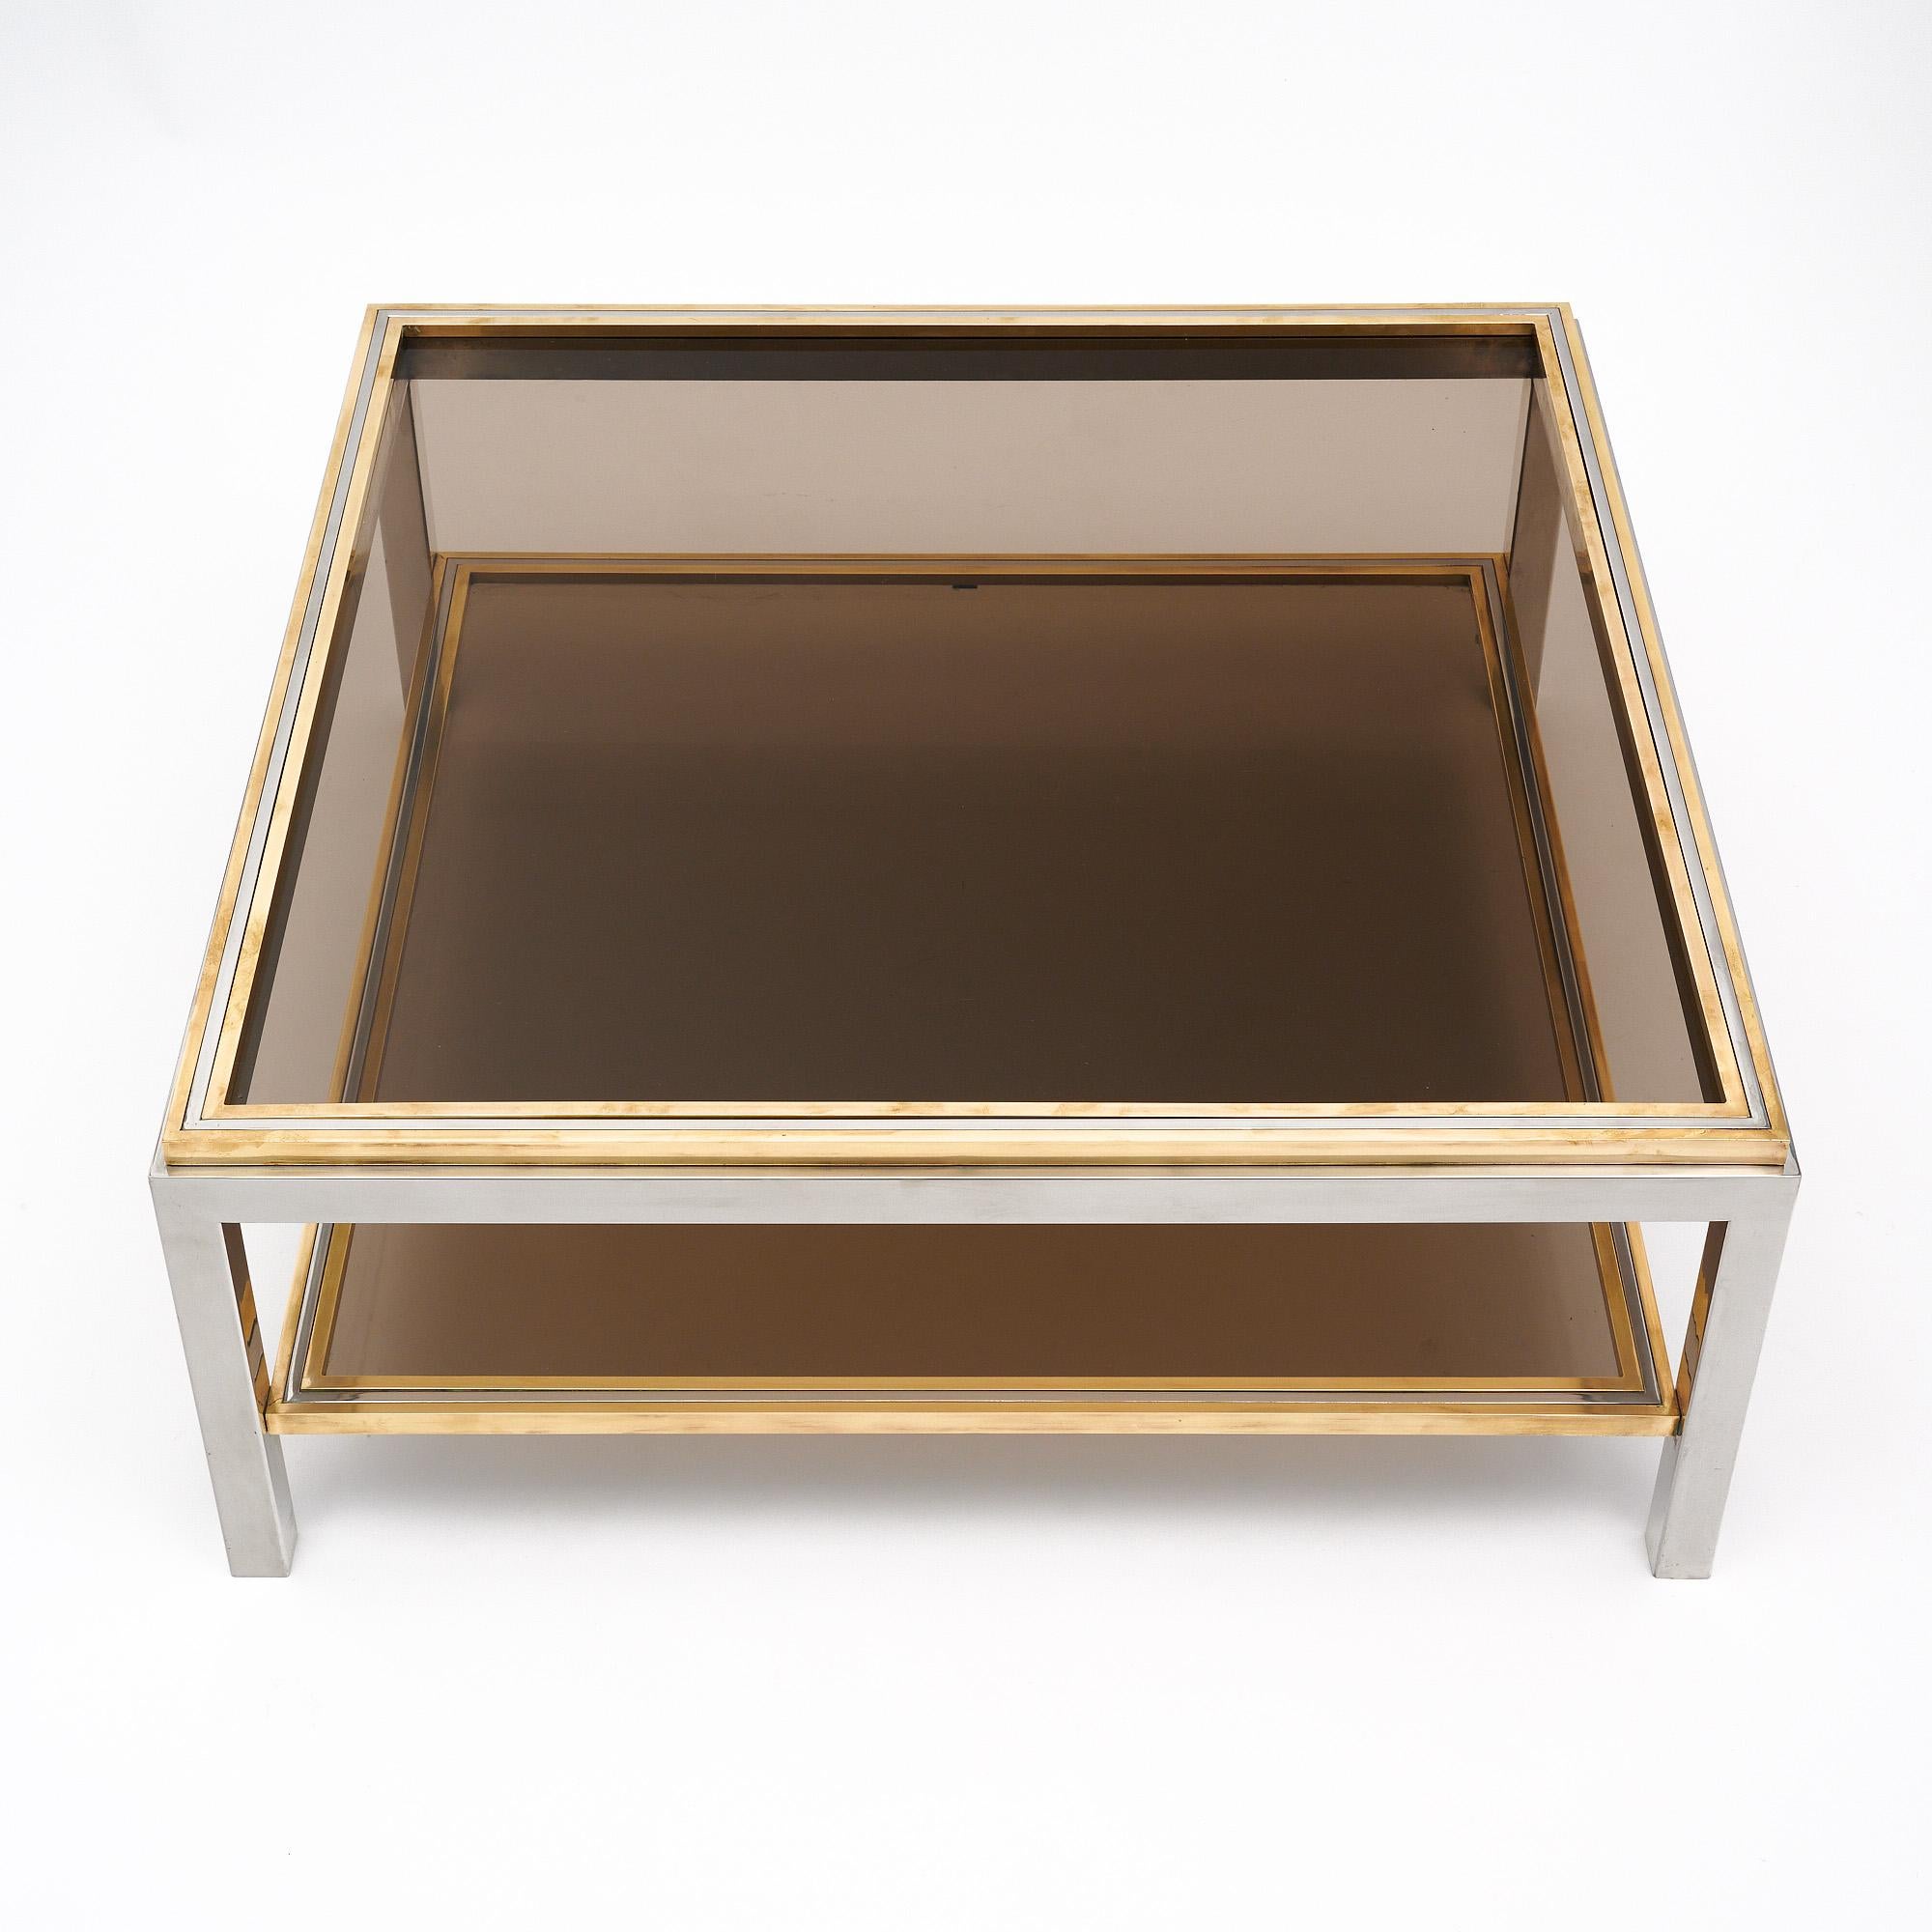 Rare coffee table from Italy in the style of Willy Rizzo. This piece is made of chromed steel with the top and lower shelf of smoked glass. The piece features brass trim throughout. Signed.
